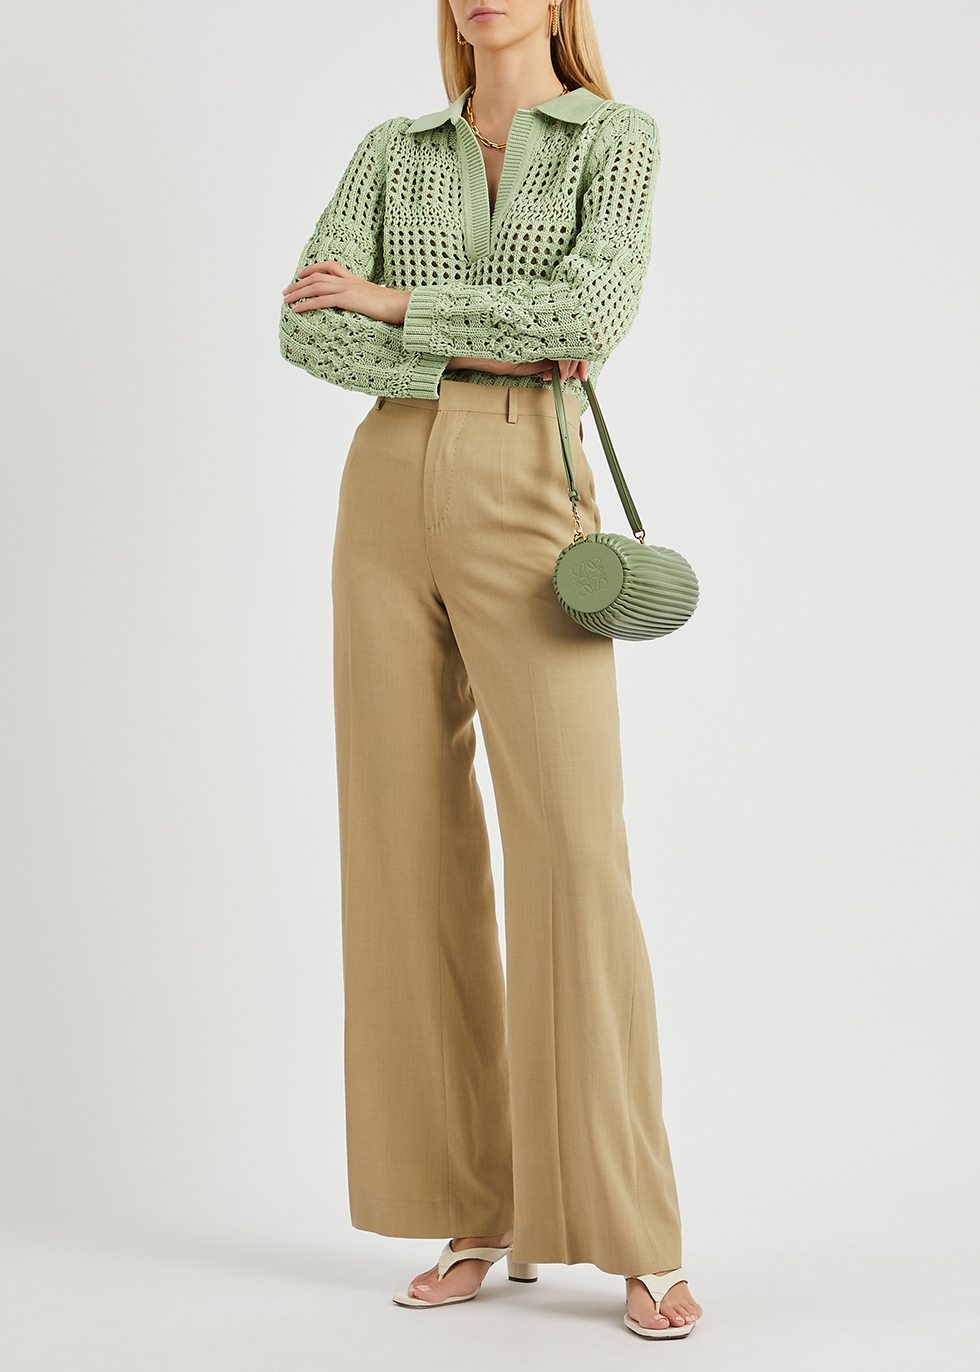 Womens Clothing Jumpers and knitwear Jumpers Jonathan Simkhai Eleni Cropped Recycled Crochet-knit Sweater in Green 